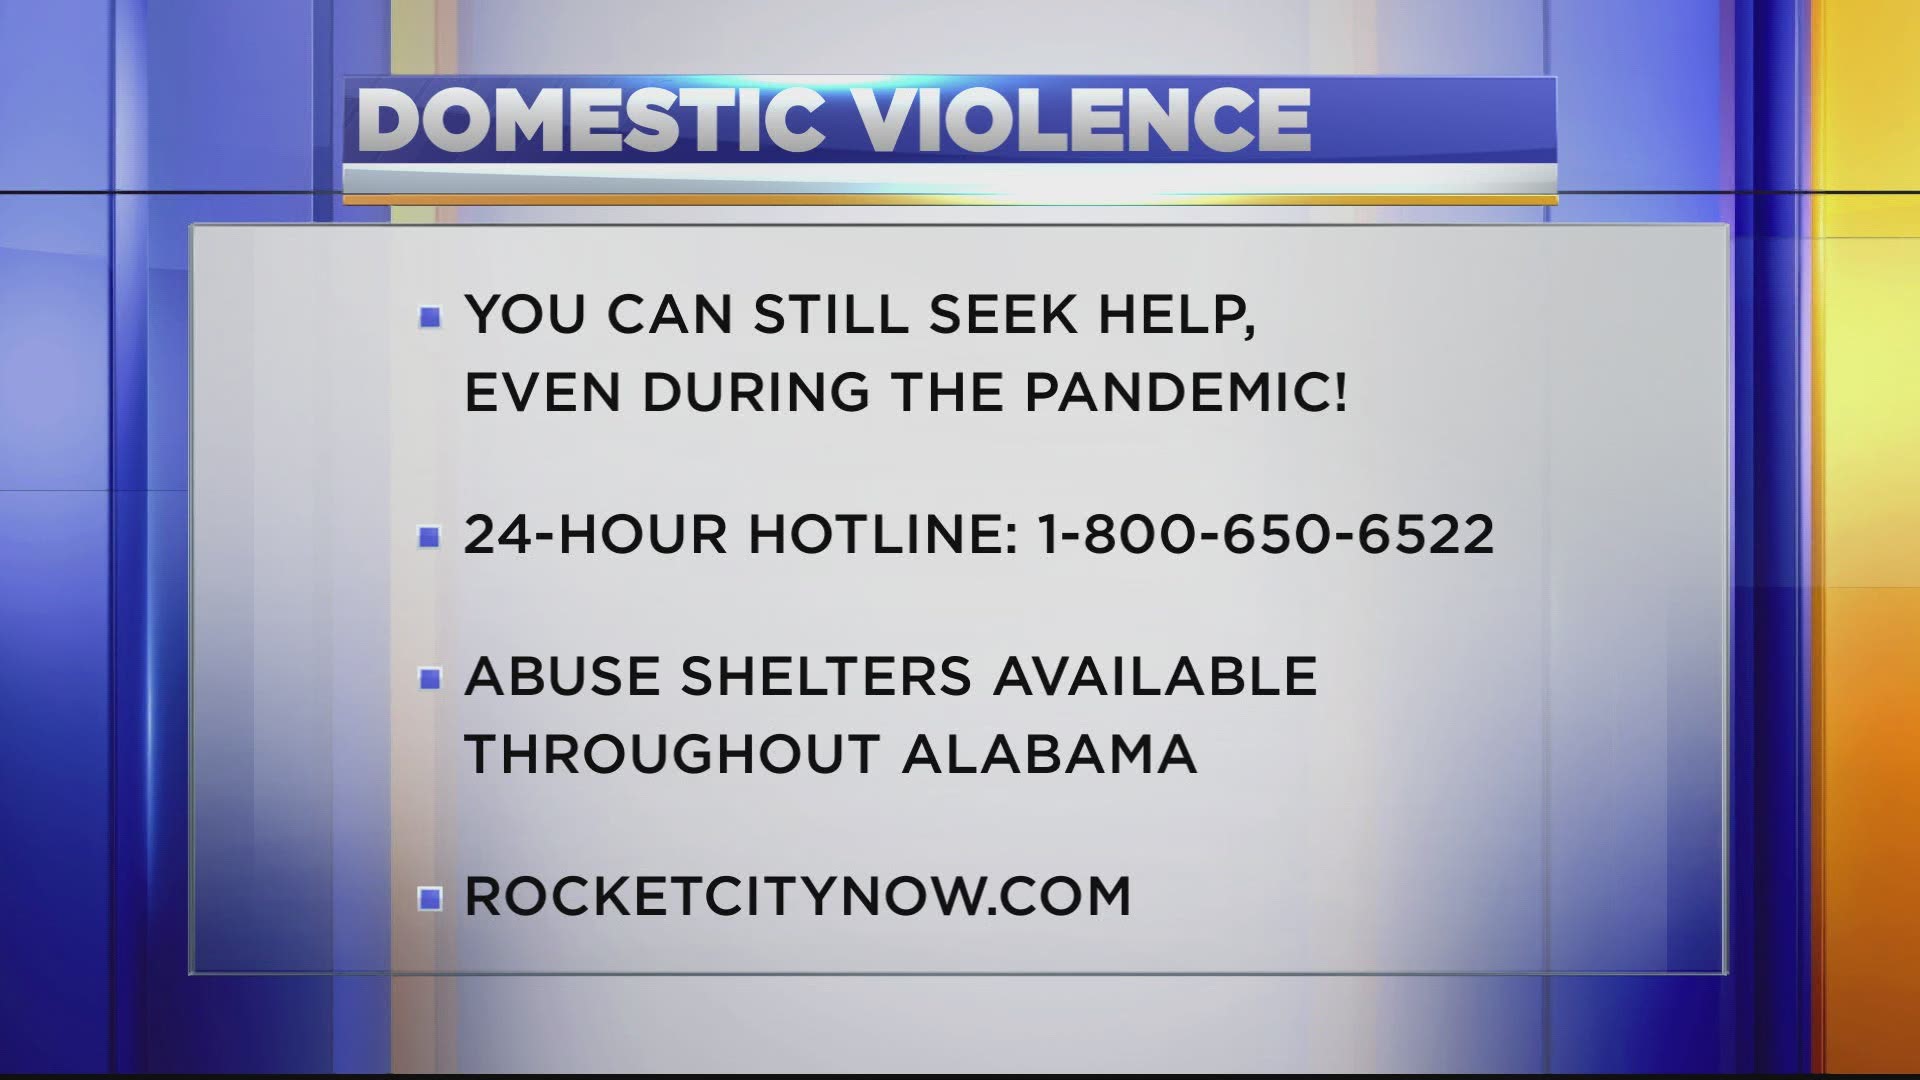 “Sheltering in place does not mean that a victim of domestic violence is required to stay in isolation with an abusive partner."